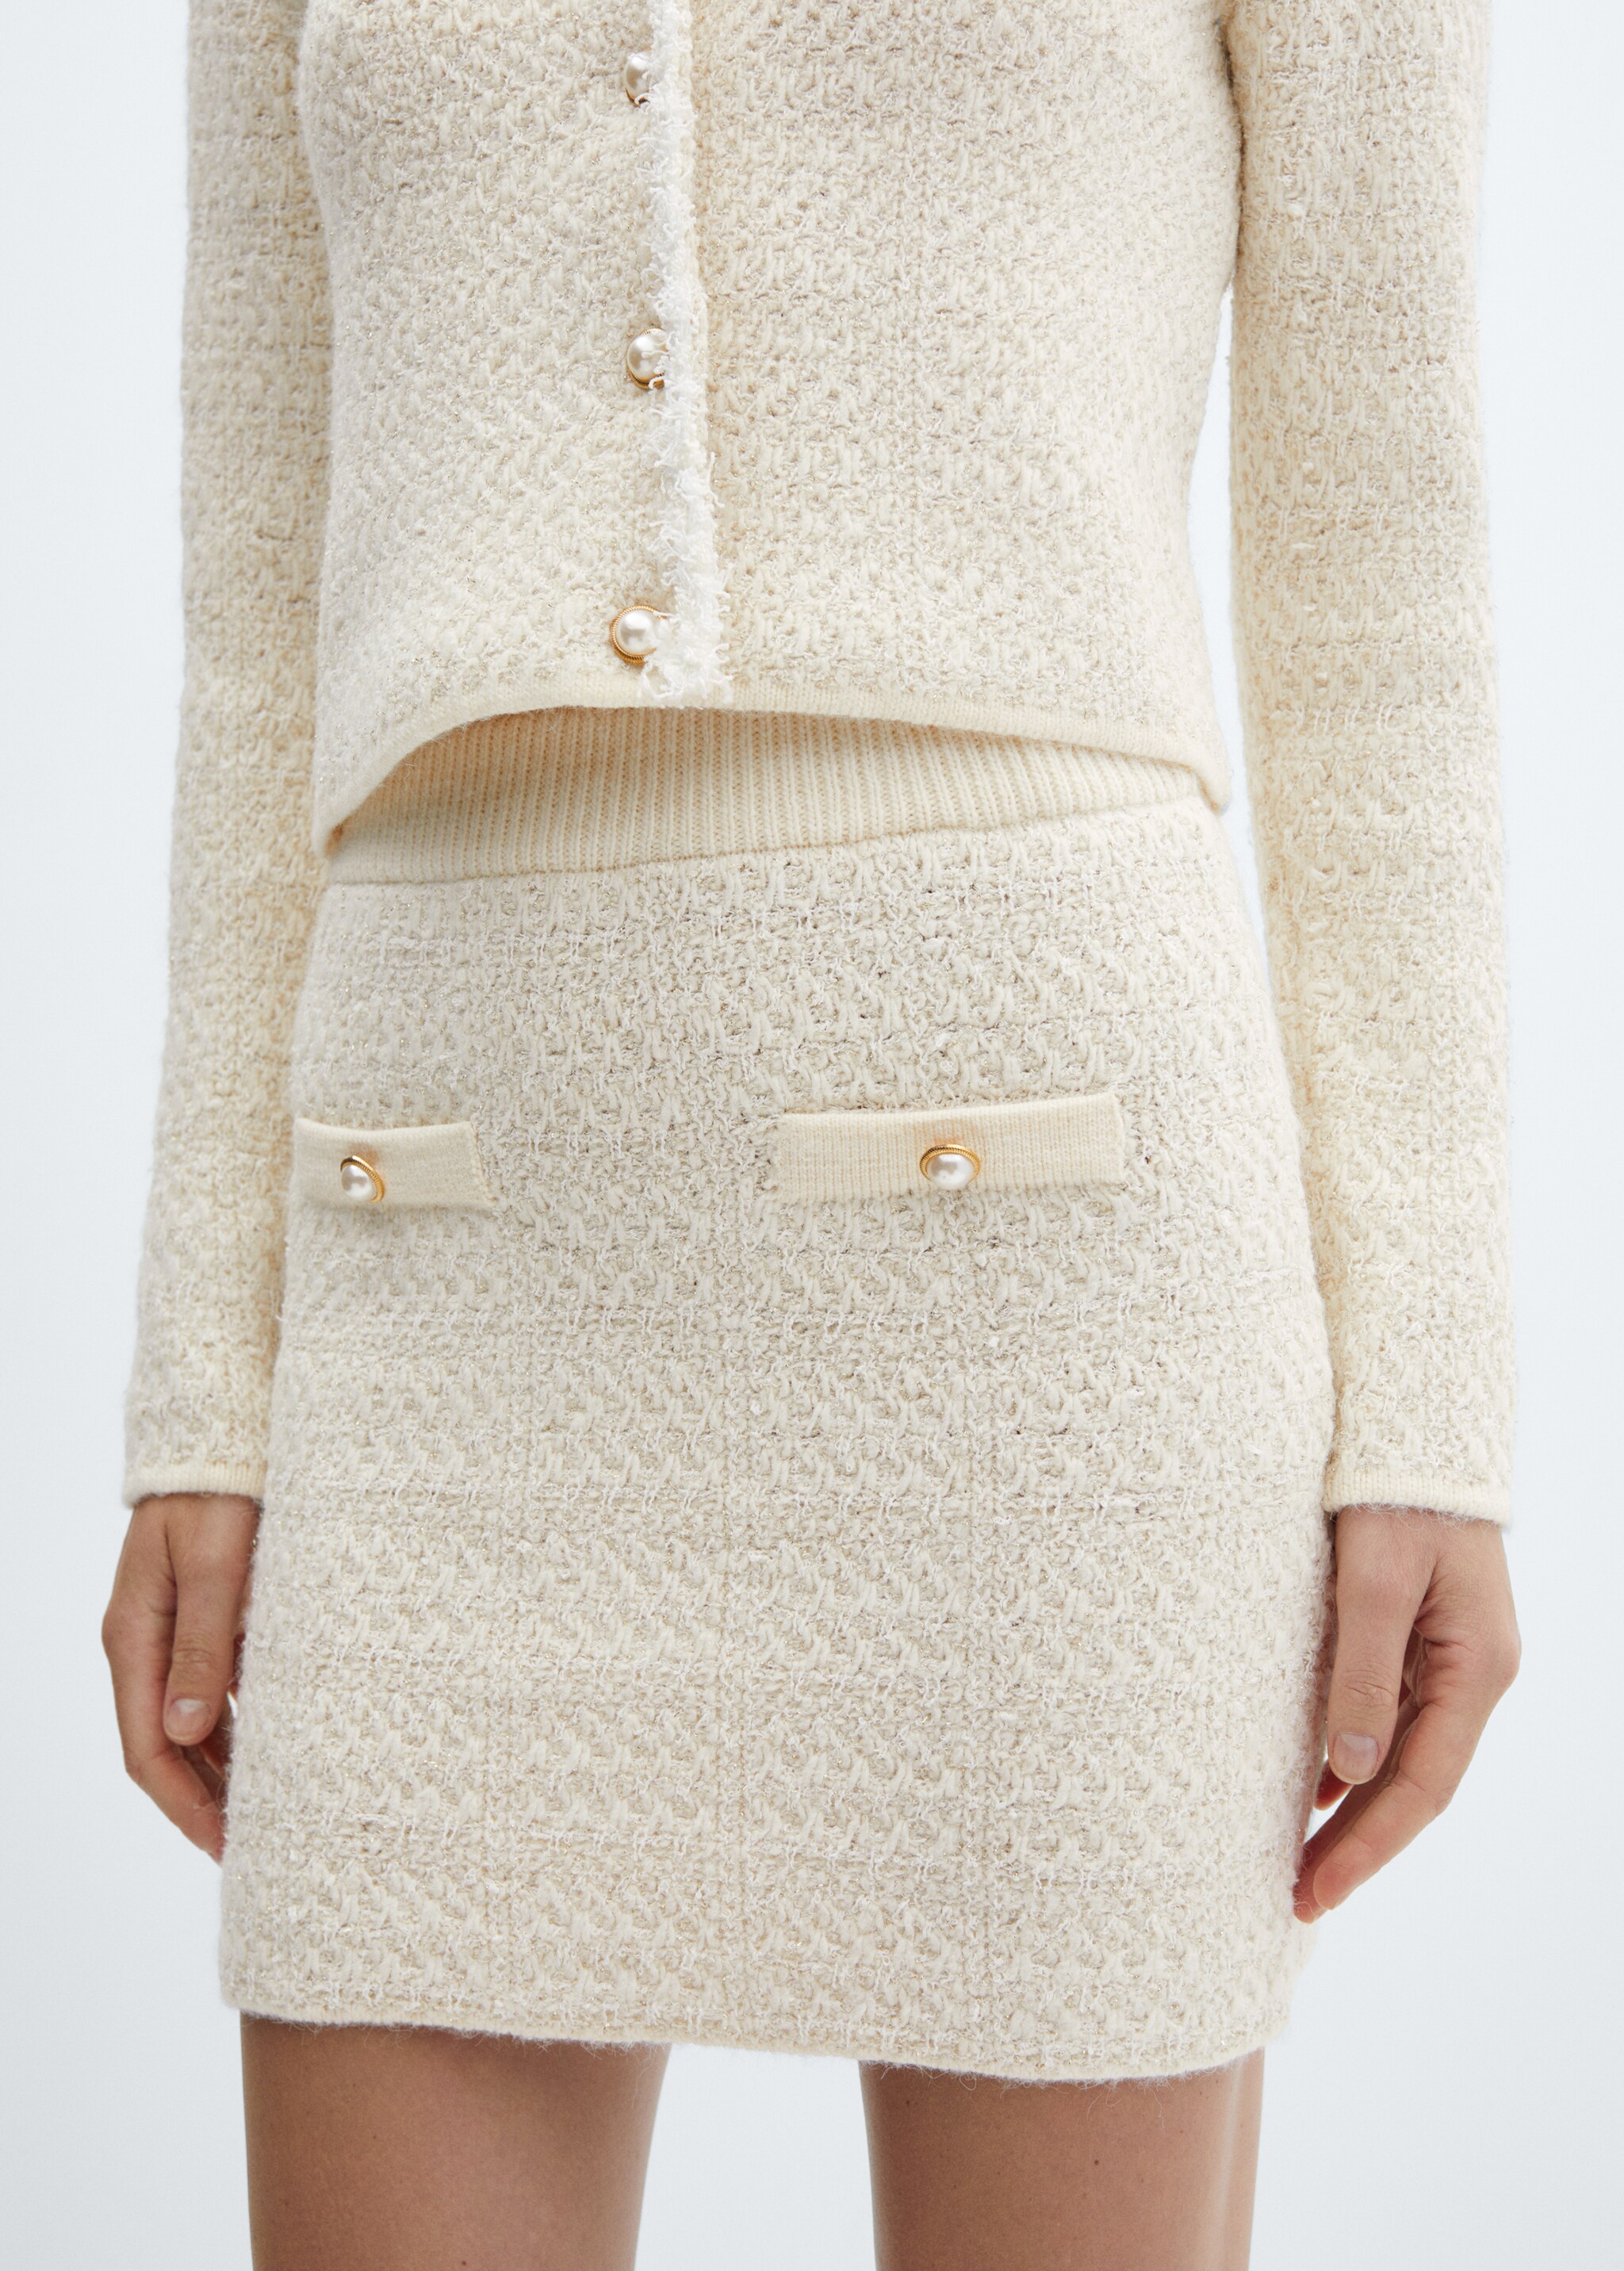 Knitted skirt with jewel buttons - Details of the article 6